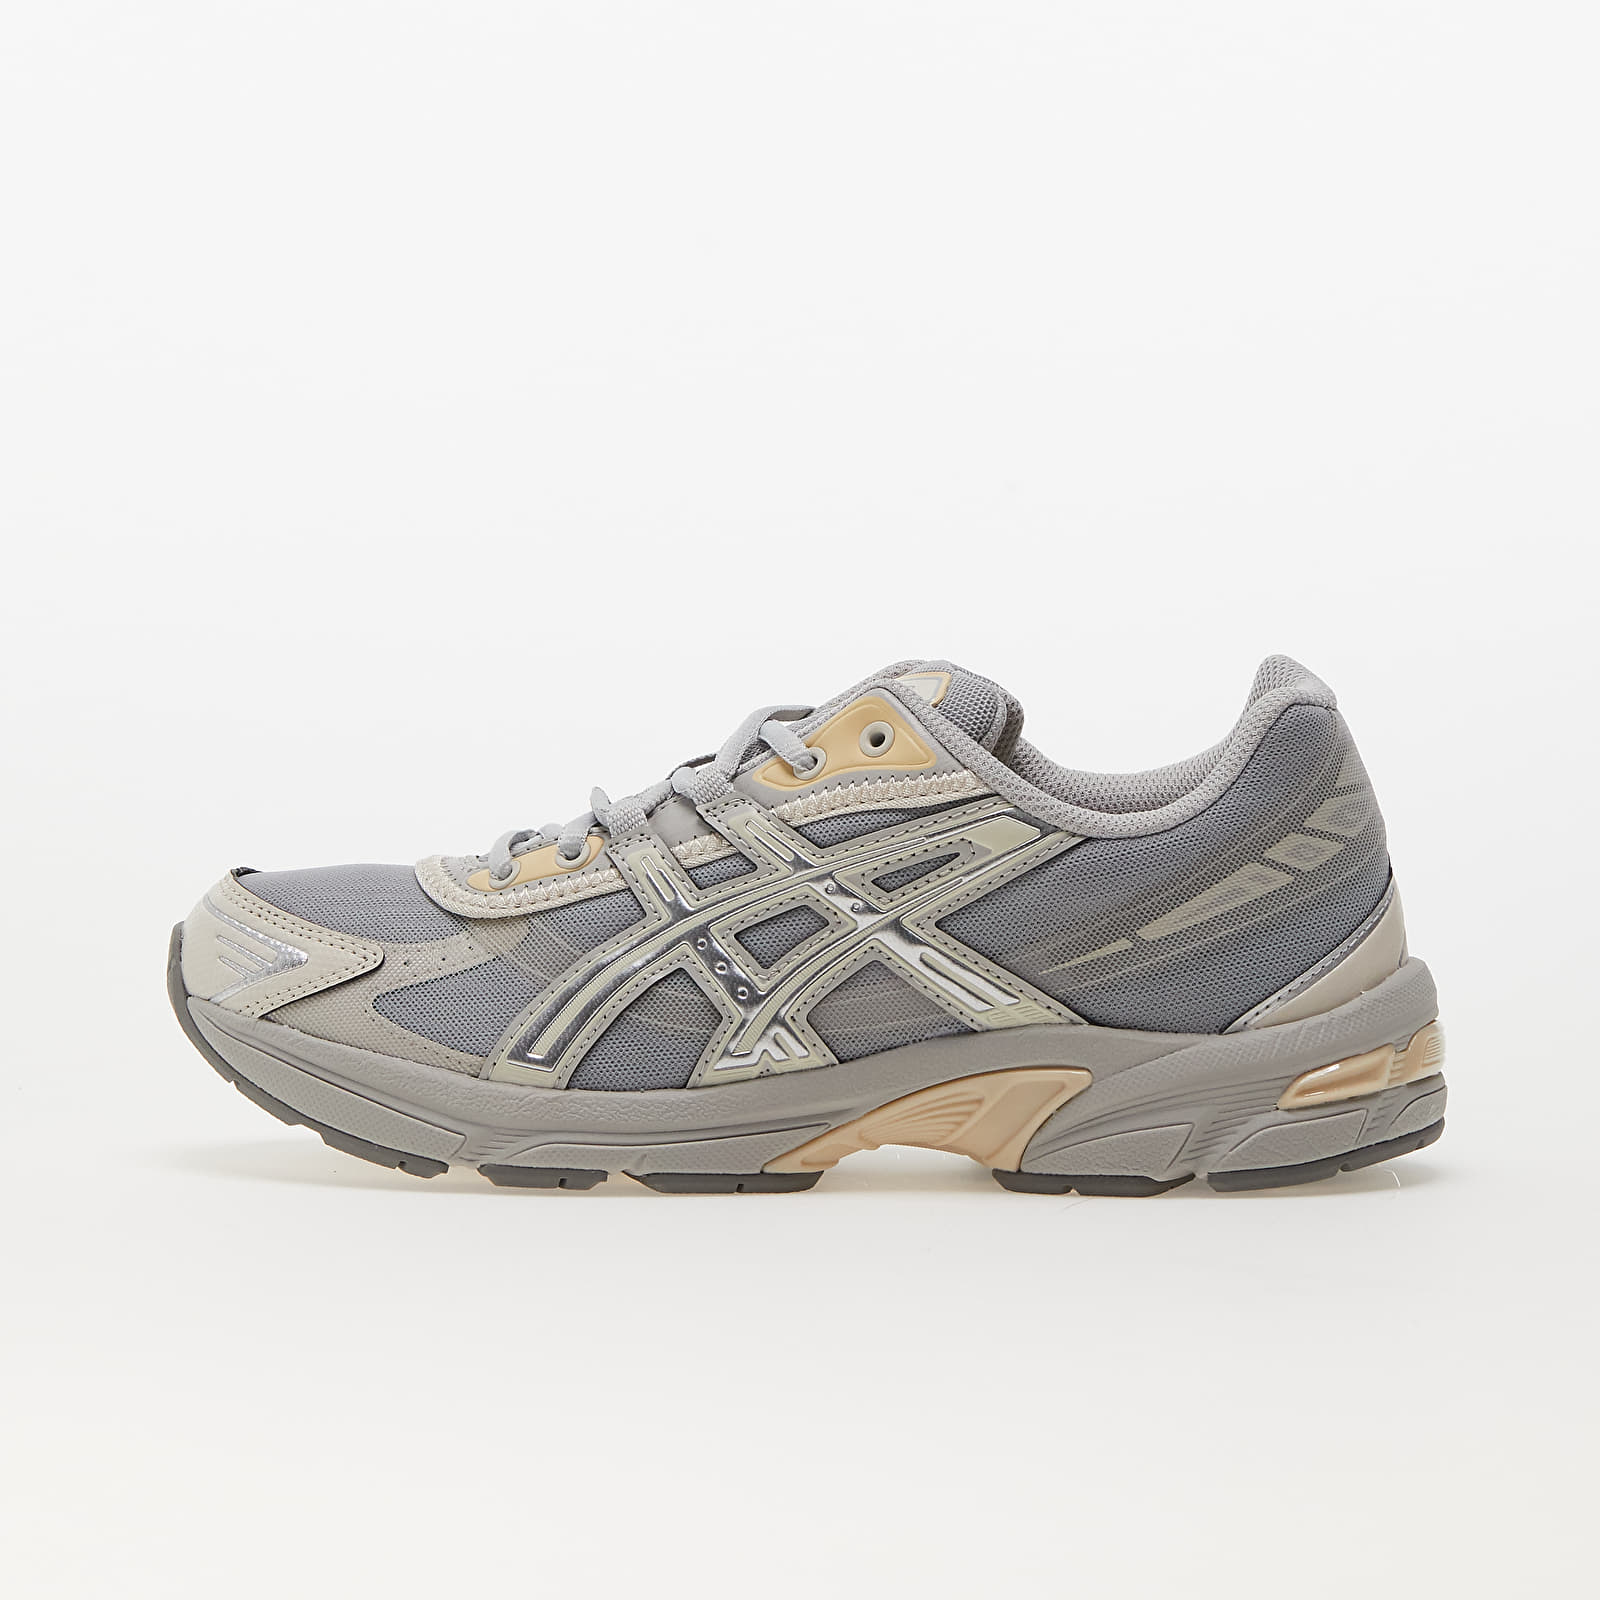 Men's shoes Asics Gel-1130 Re Oyster Grey/ Pure Silver